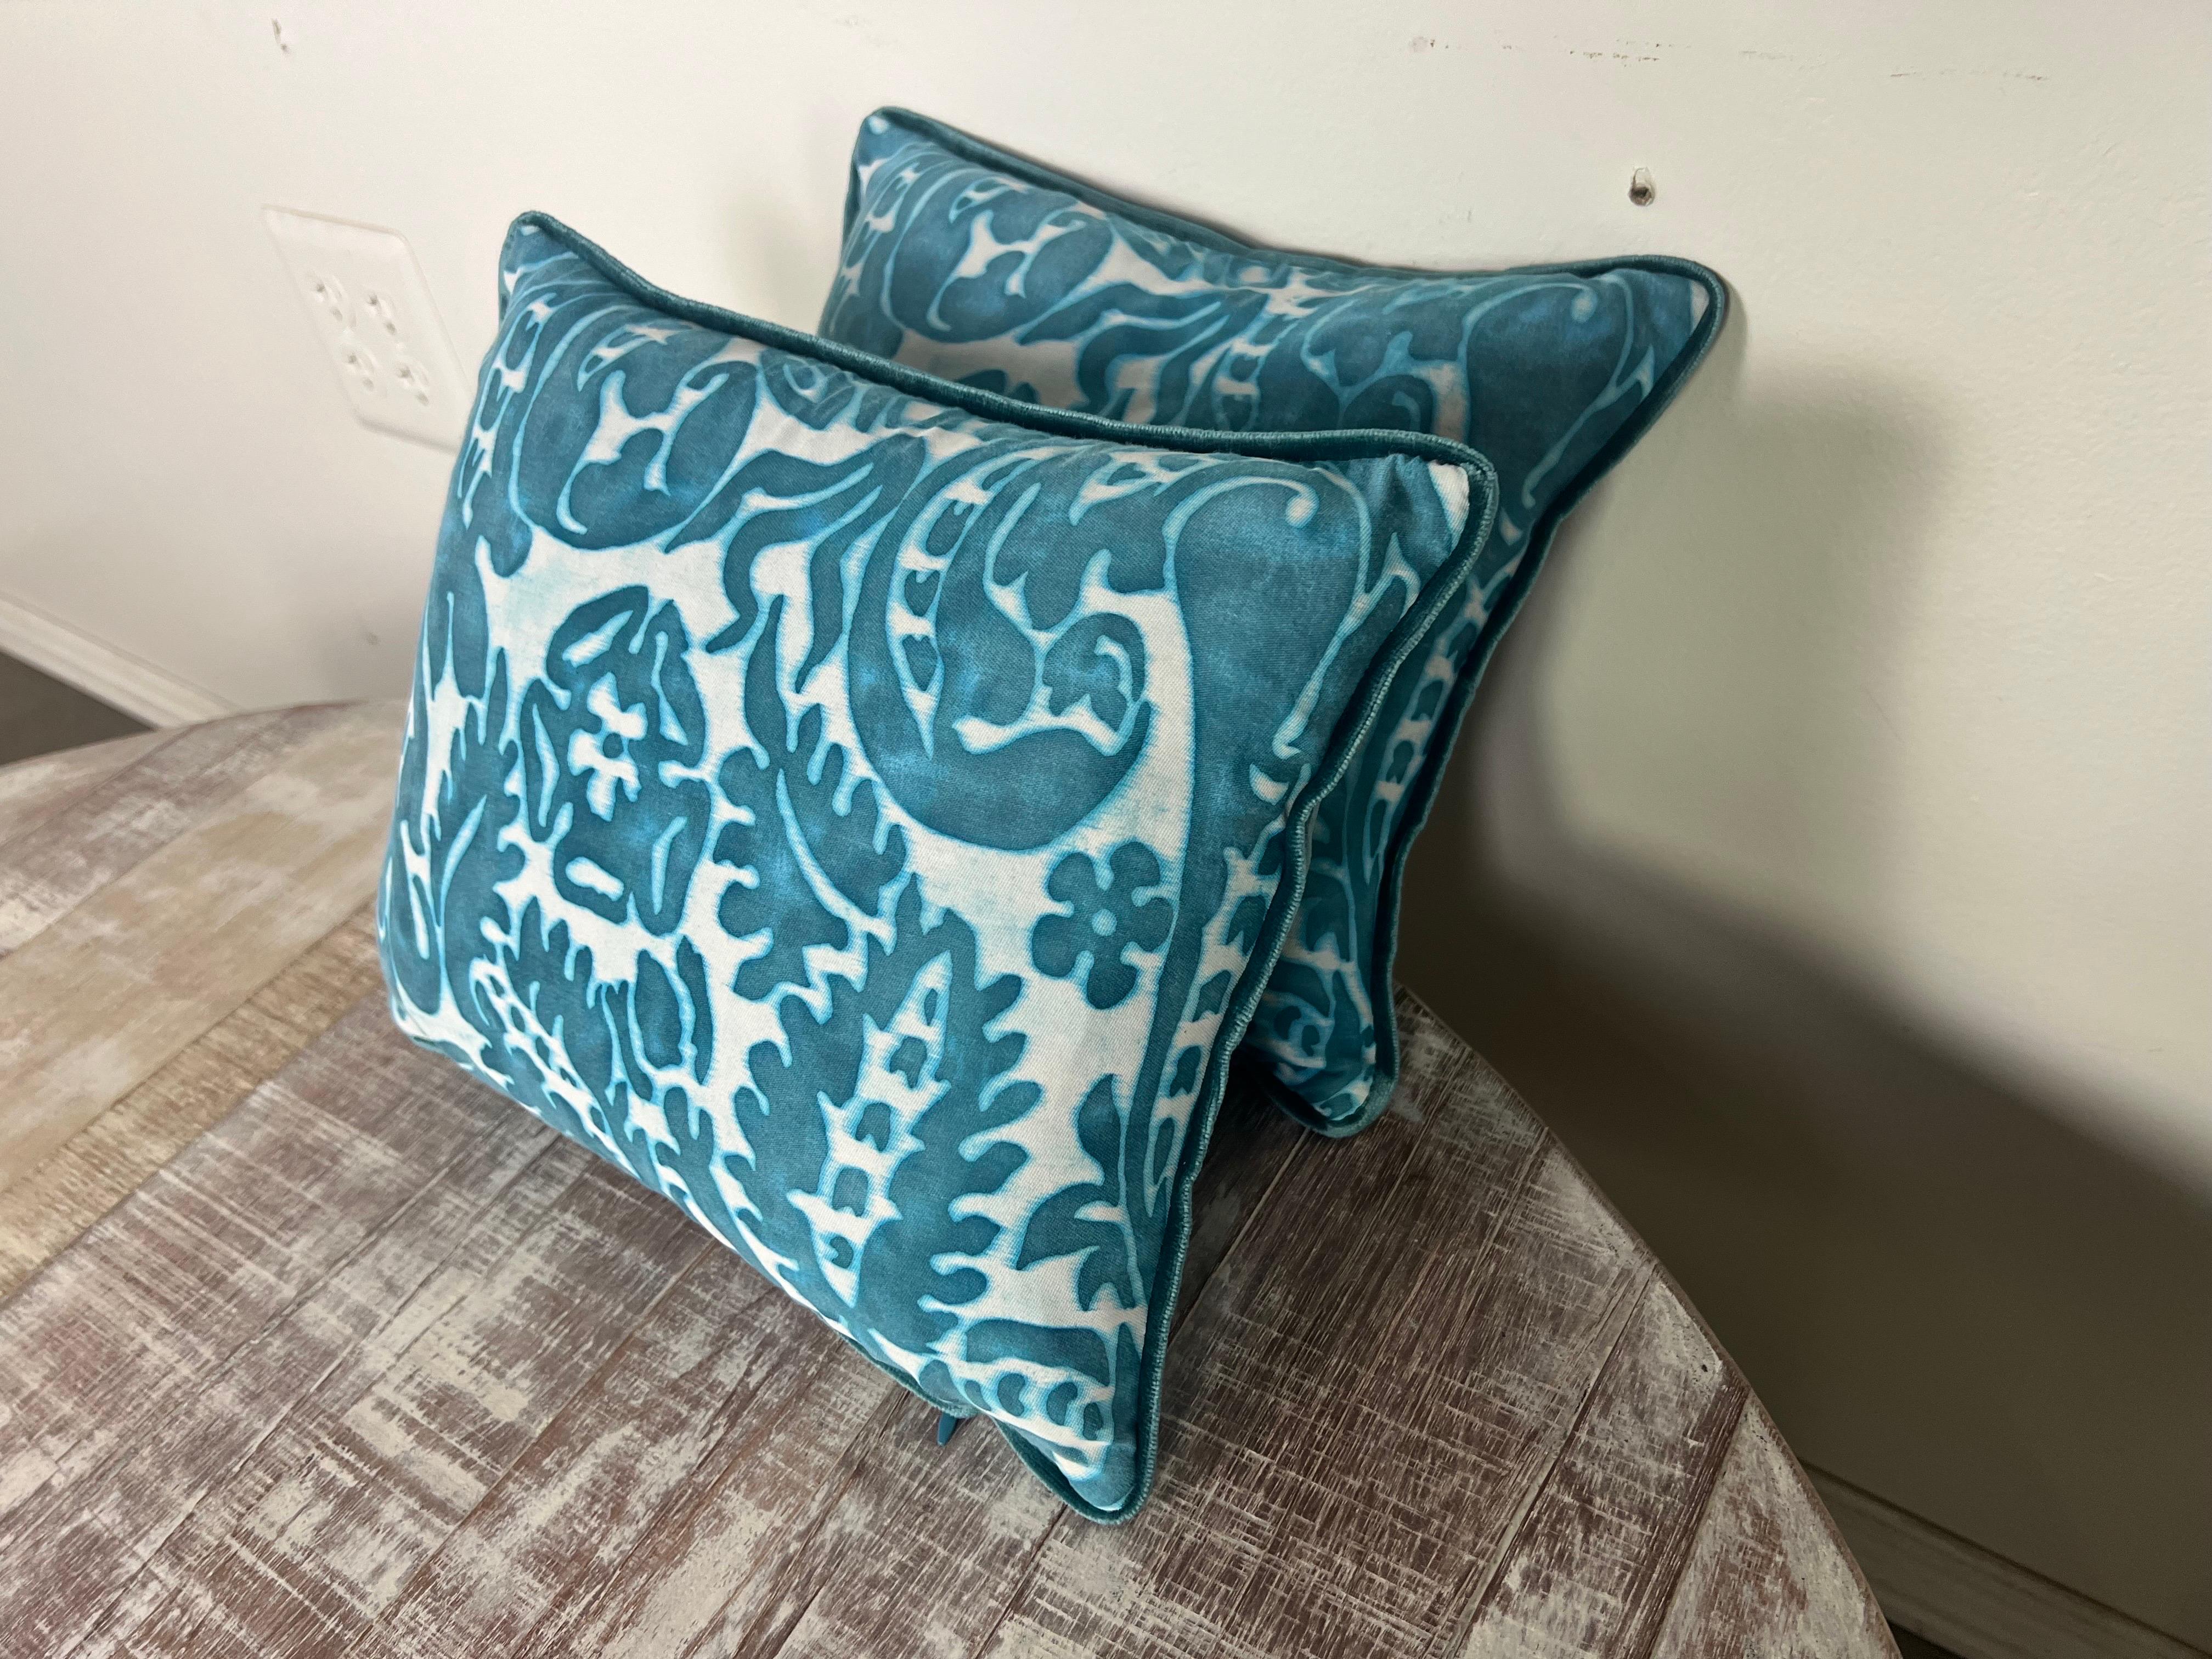 Italian Pair of Teal and White Colored Fortuny Style Pillows